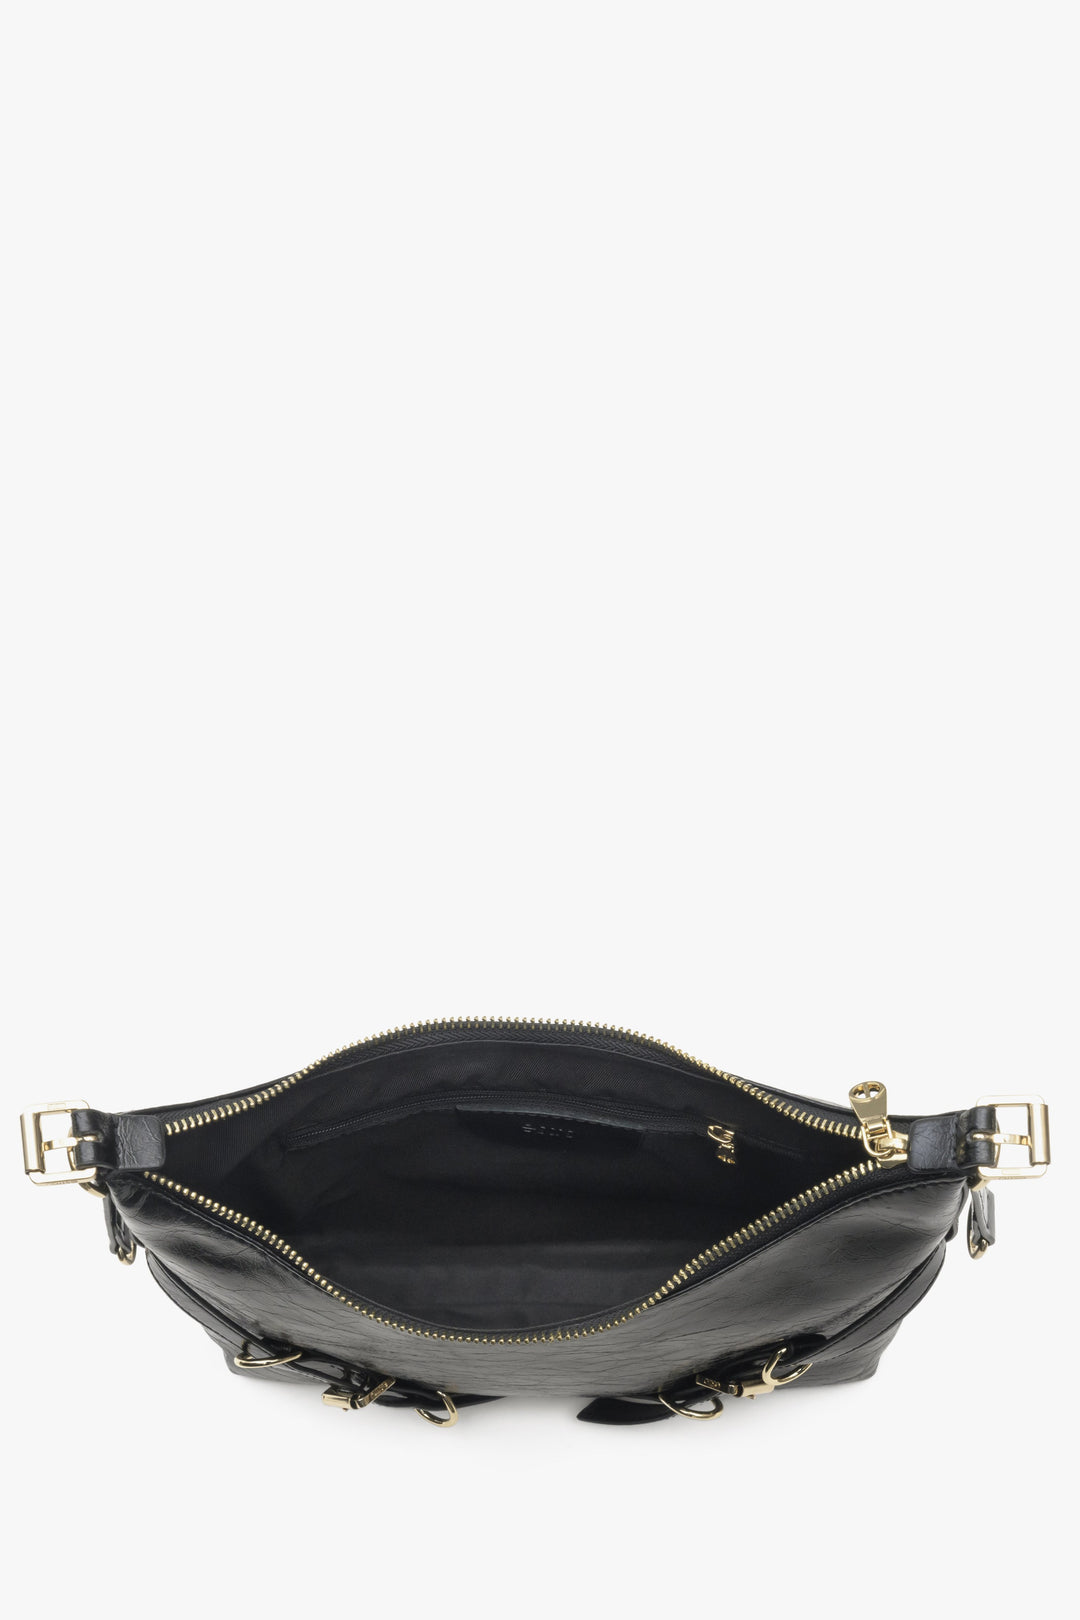 Women's black Estro shoulder bag made of patent leather - close-up on the interior of the model.